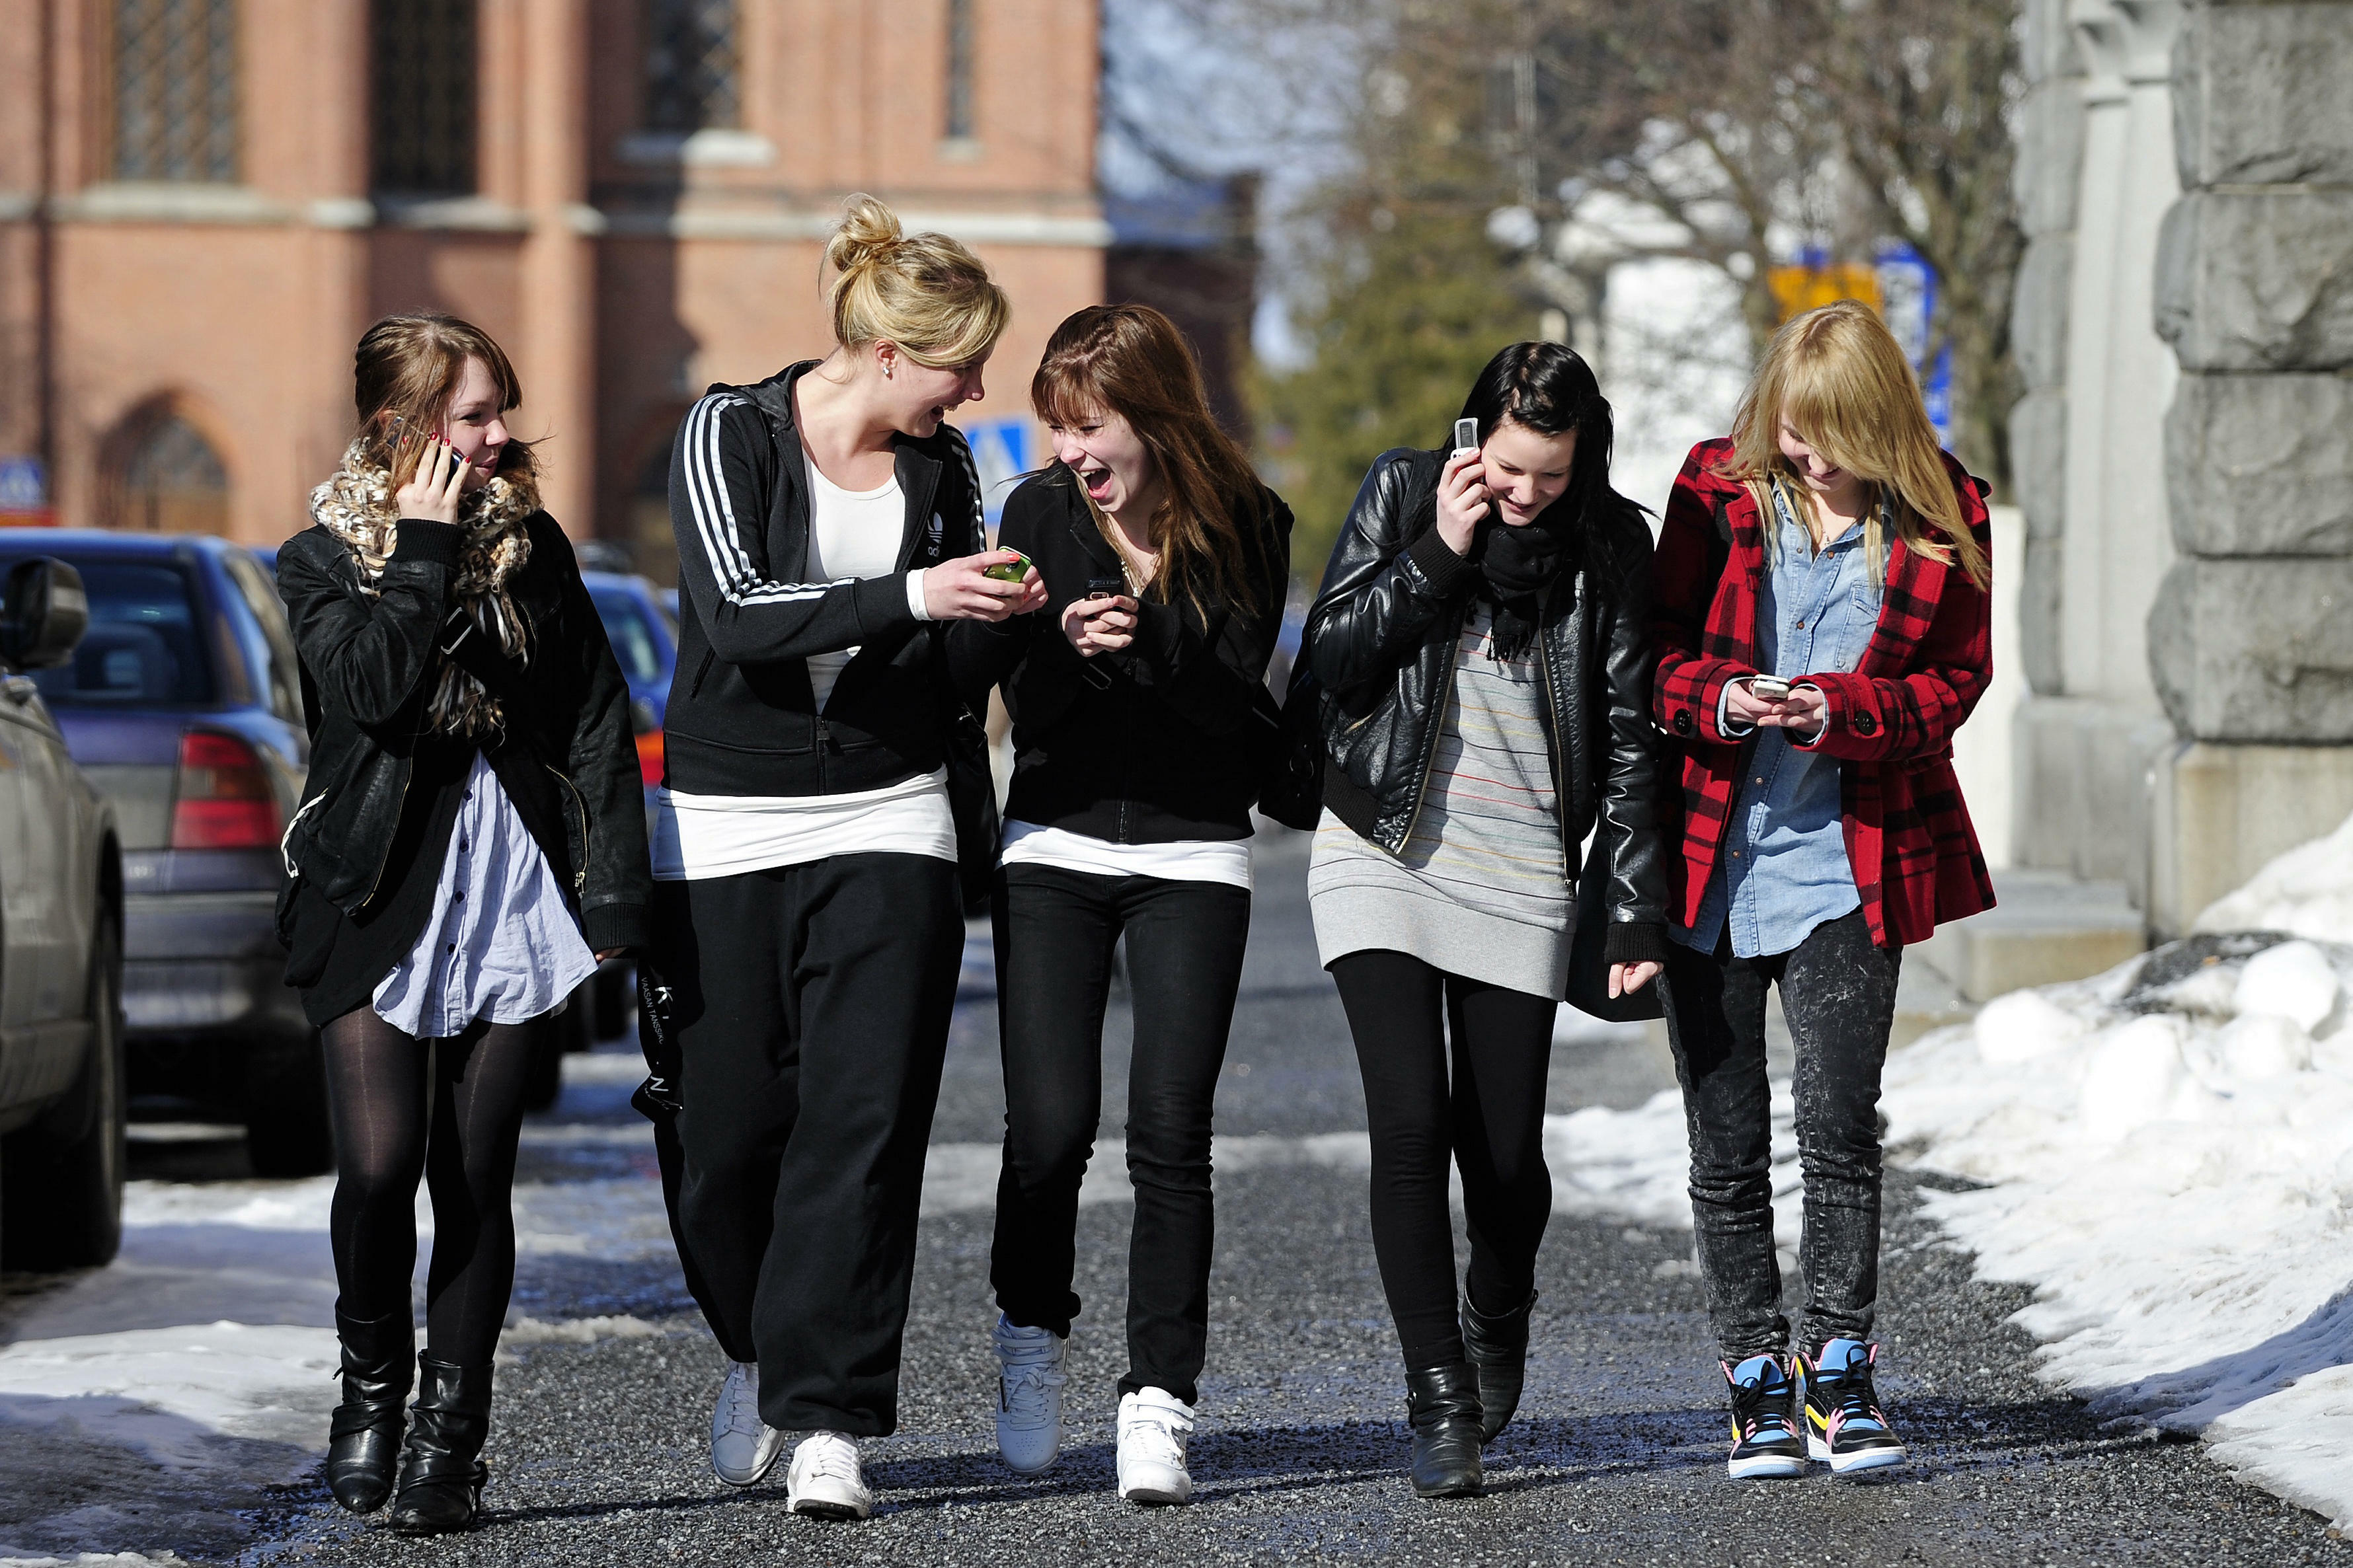 Teenagers use their cell phones after school time in Vaasa, Finland, on March 30, 2010.      AFP PHOTO / OLIVIER MORIN (Photo credit should read OLIVIER MORIN/AFP/Getty Images)